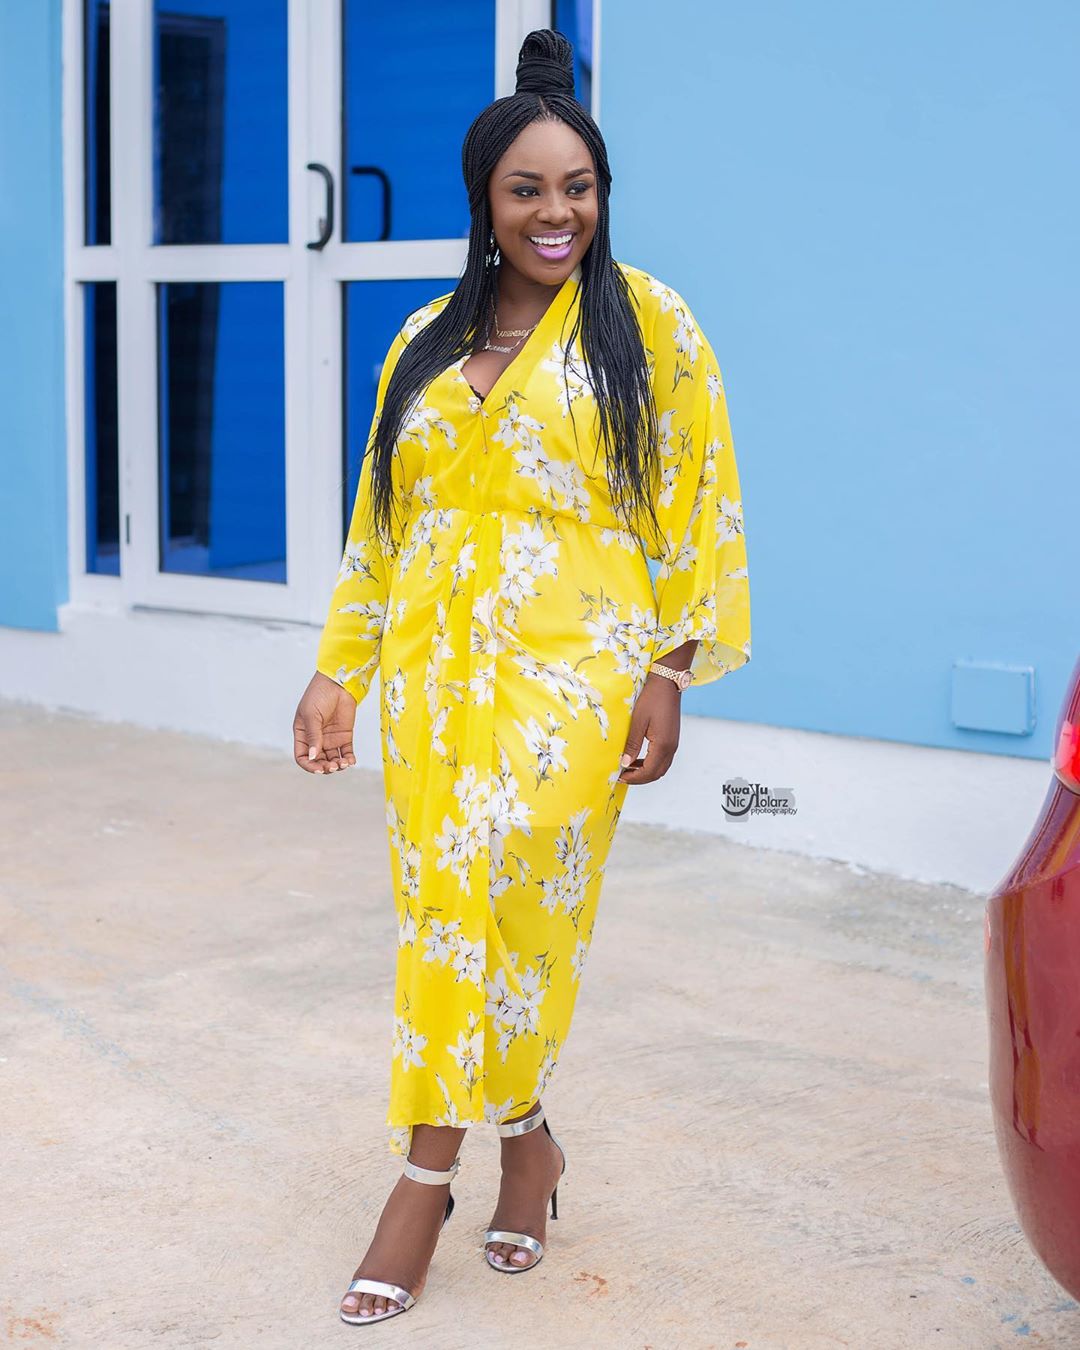 10 pictures of Actress Emelia Brobbey that shows she is one of Ghana's prettiest (photos)